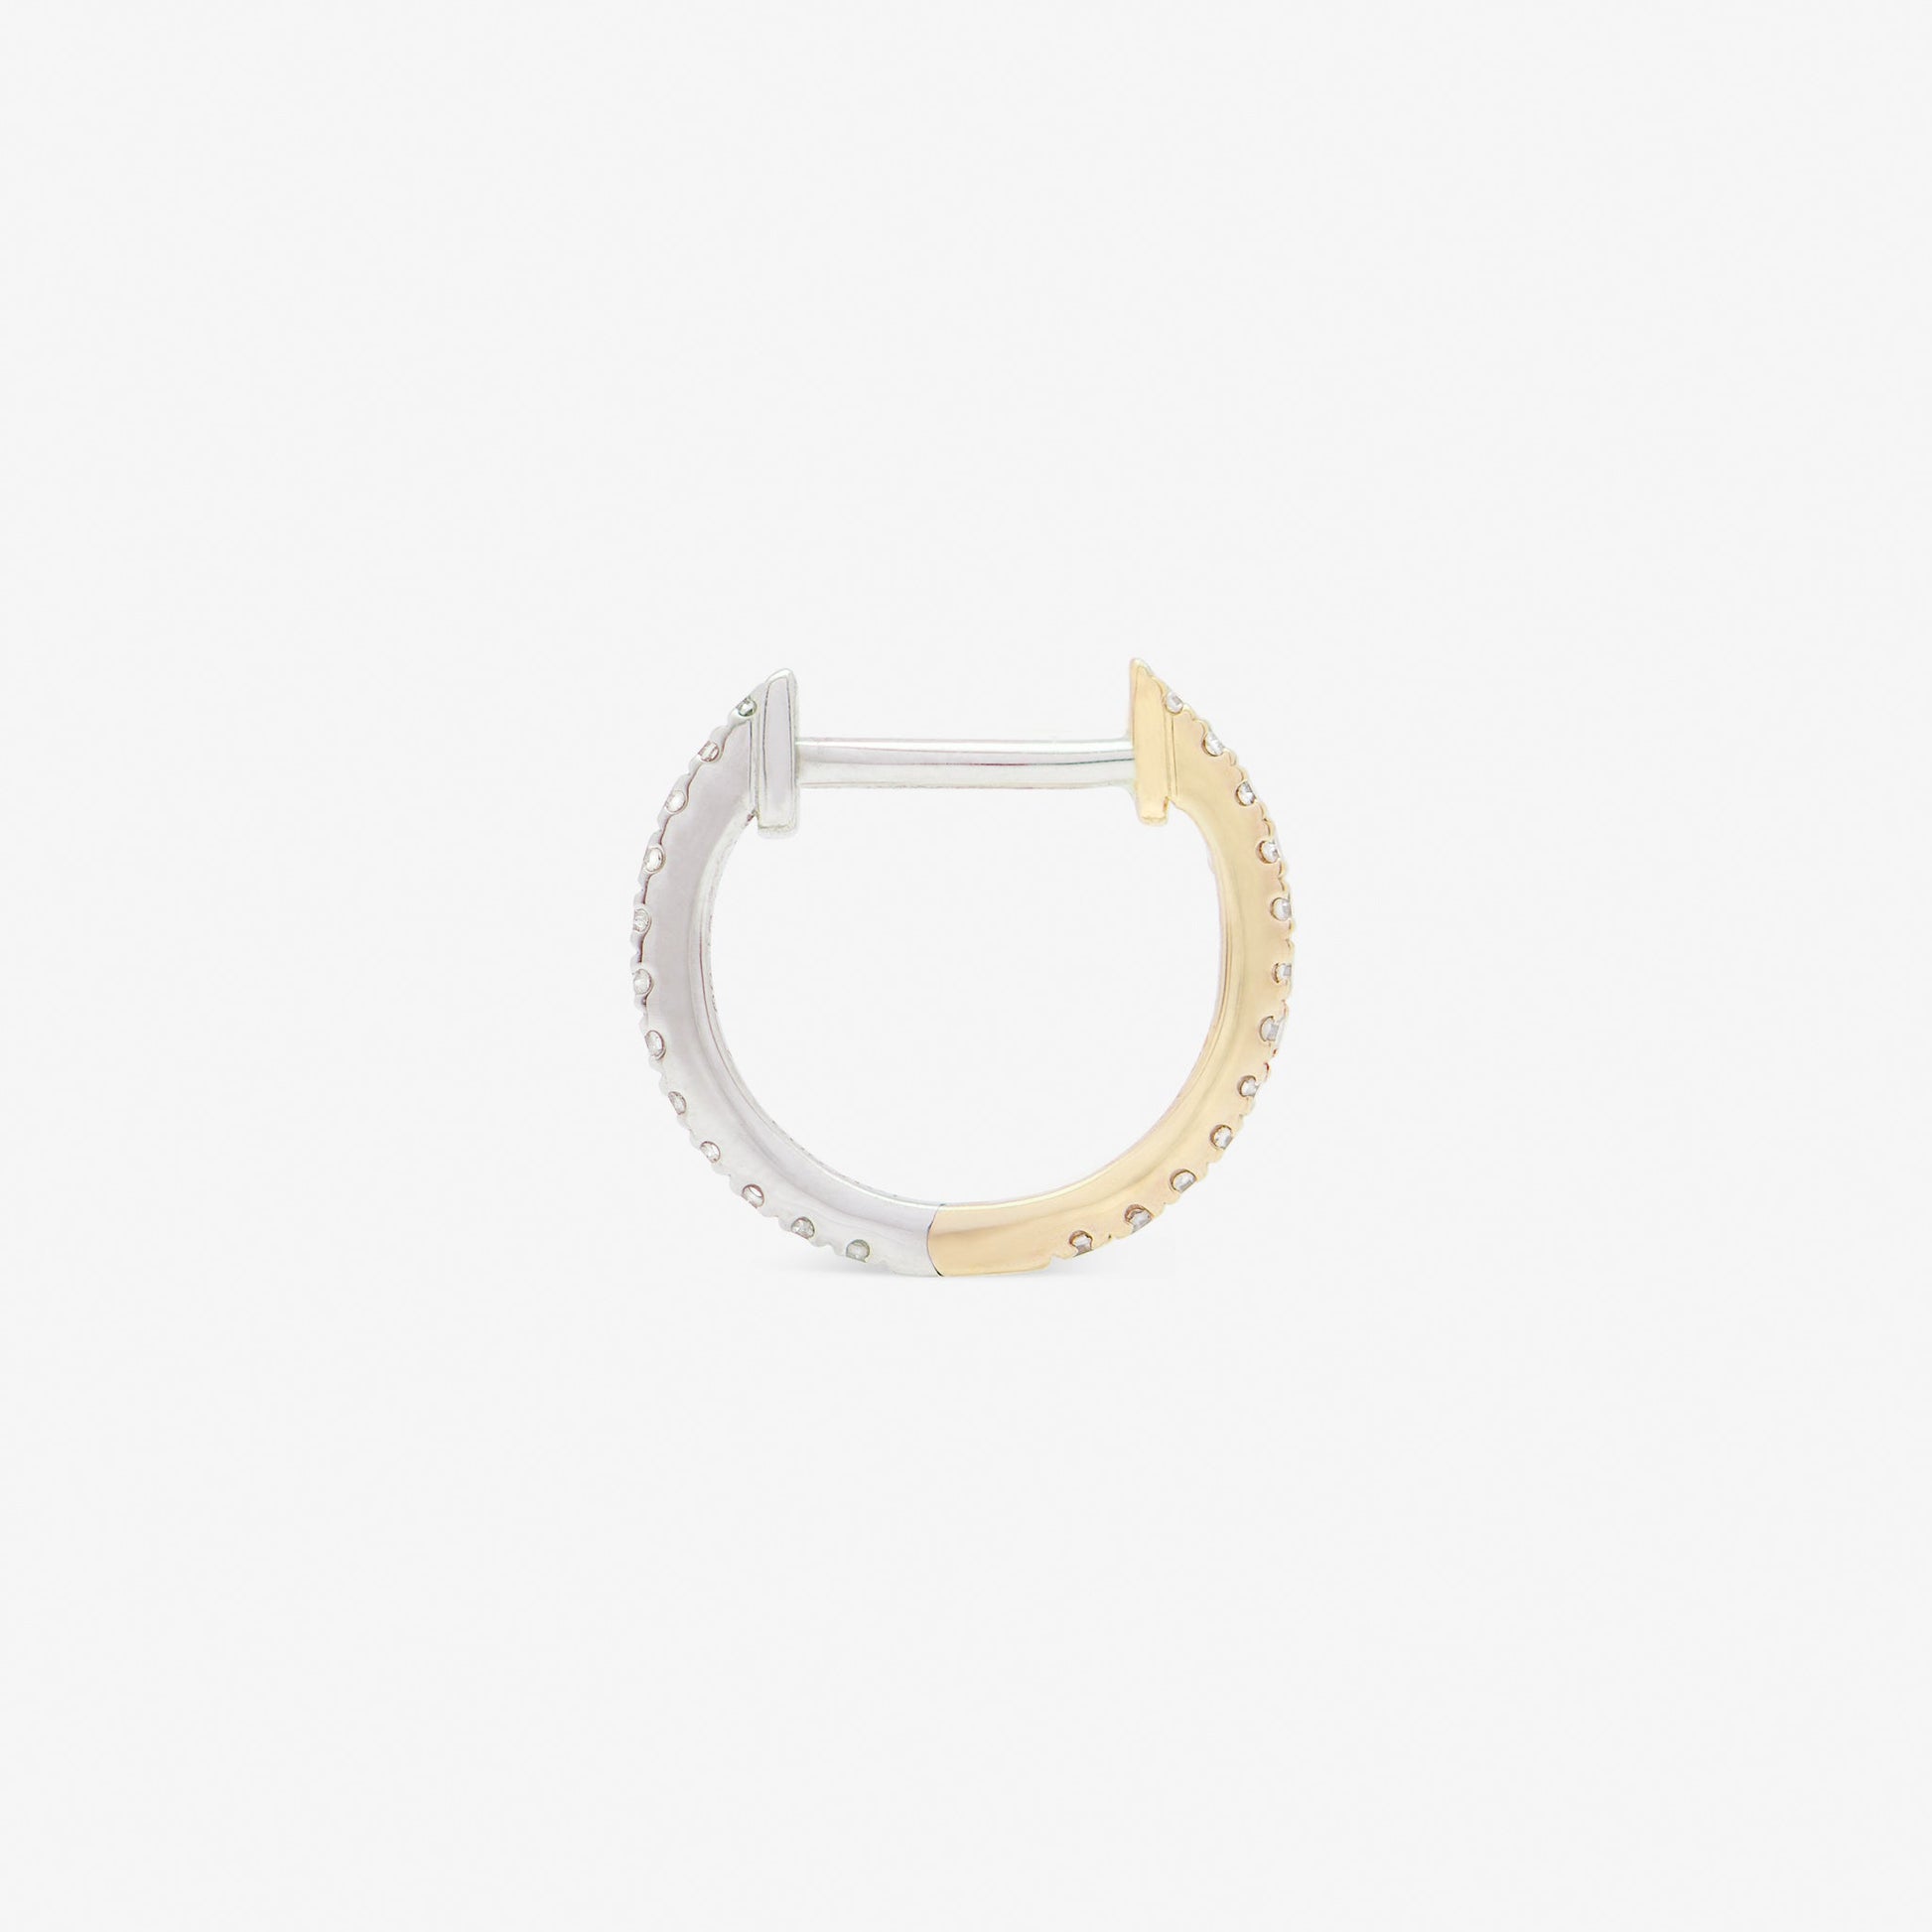 10mm hoop in yellow and white gold from side